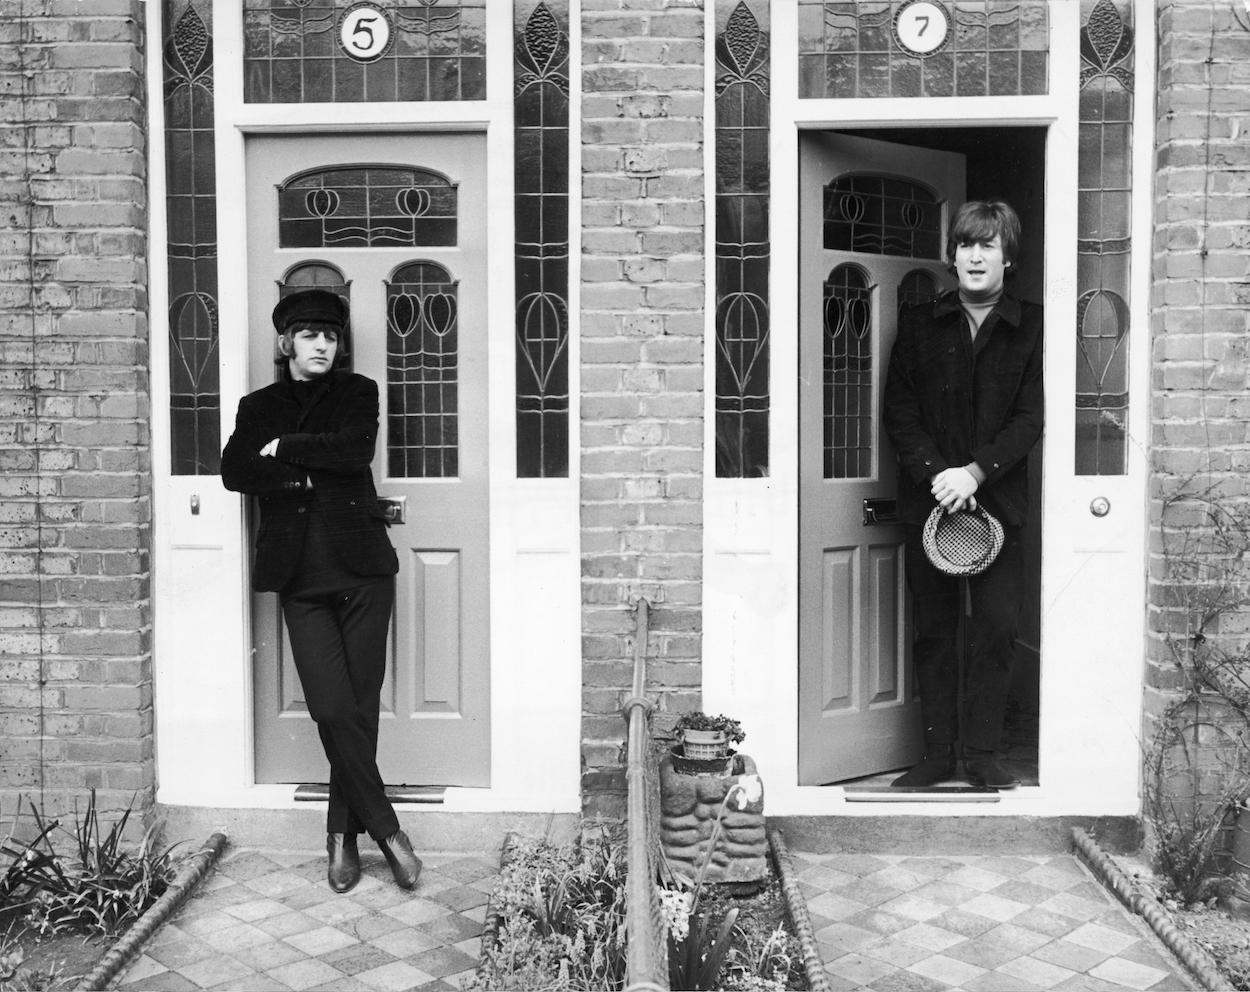 Ringo Starr (left) and John Lennon film 'Help' in 1965. Ringo's apartment in London was like a playground for his famous friends once he moved out.